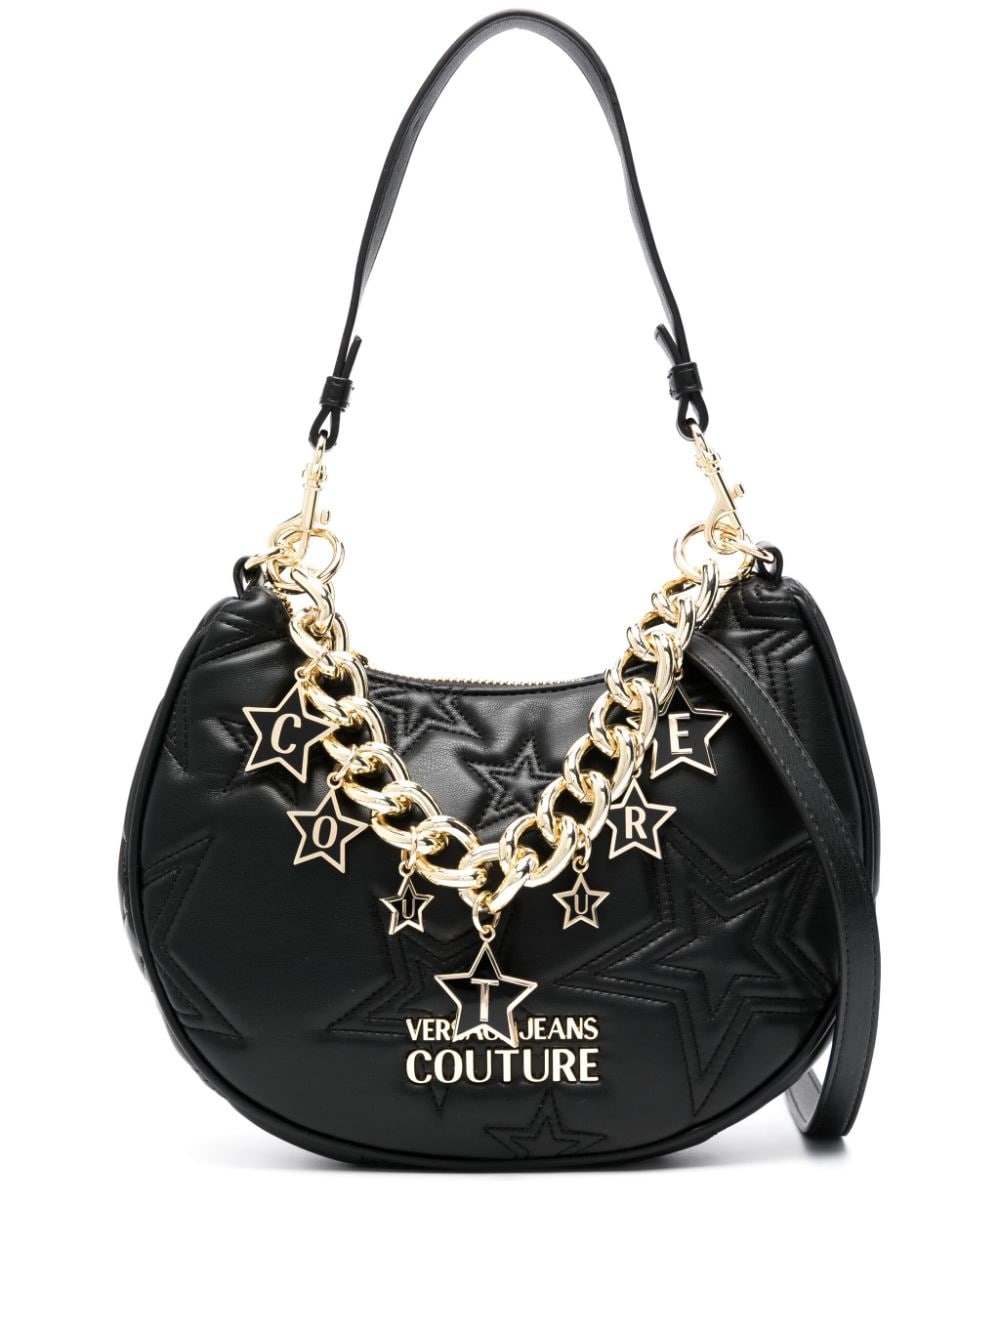 Versace Jeans Couture Chain Couture Faux-Leather Shoulder Bag - Red